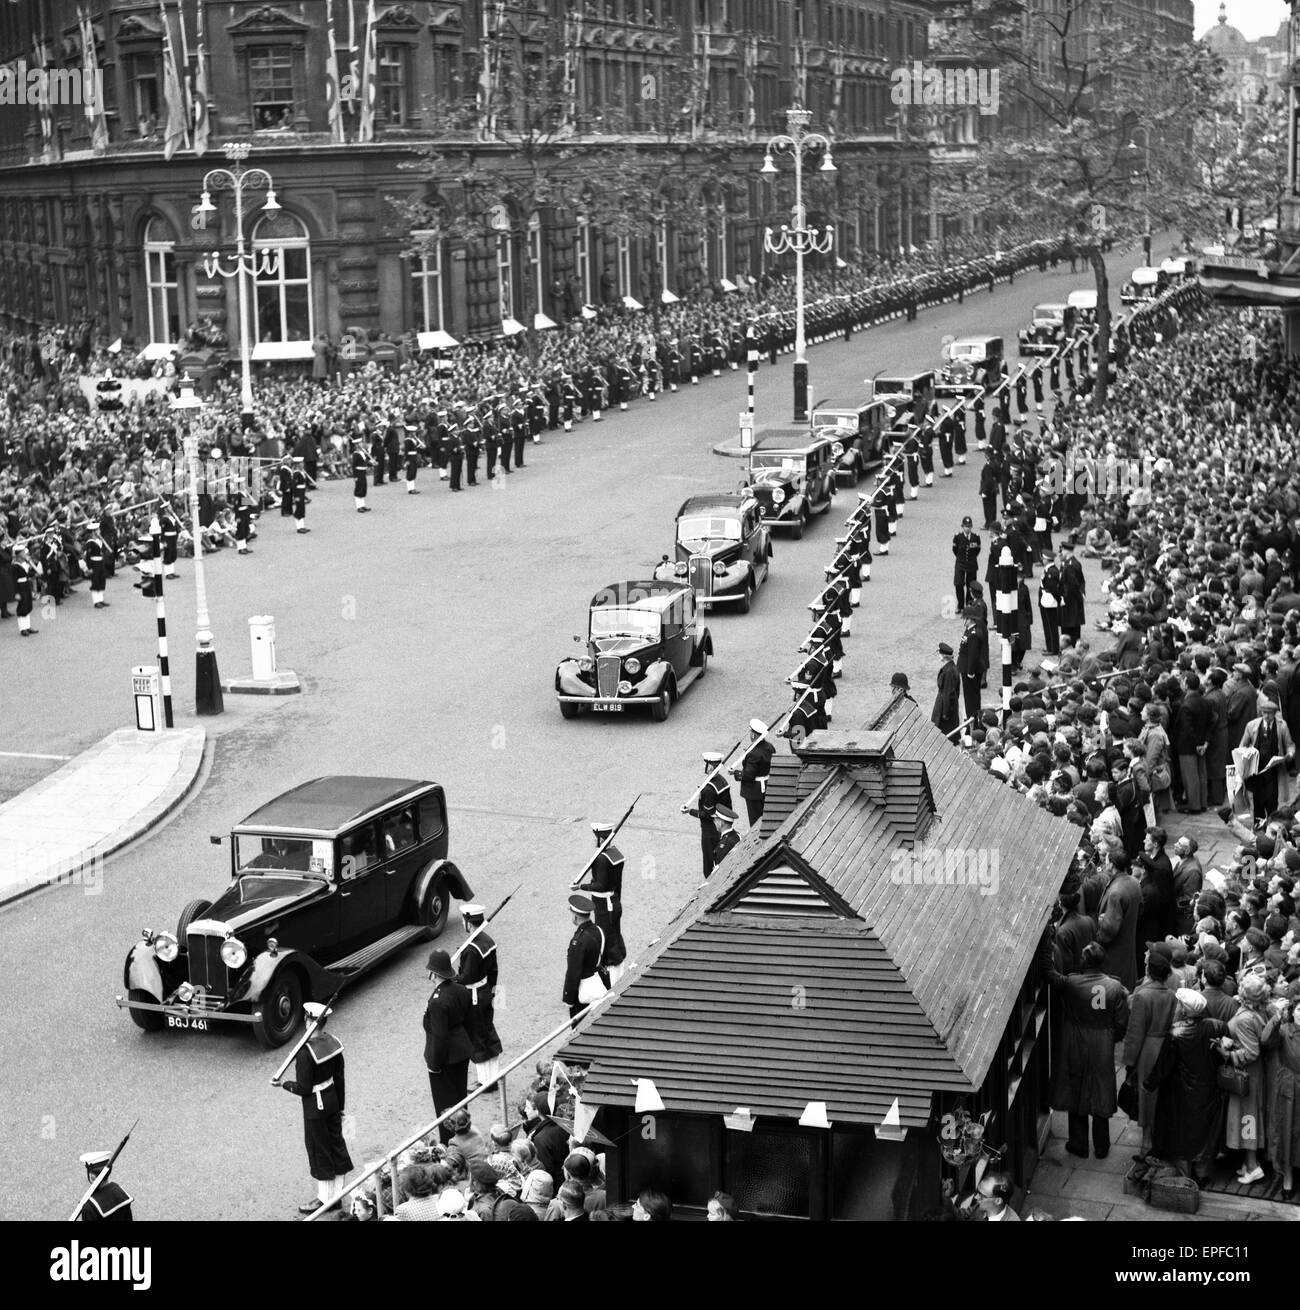 Motor-Car Procession of Royal and other Representatives of Foreign States seen here making their way down Northumberland Avenue ahead of the gold state coach carrying the Queen to Westminster Abbey for her coronation 2nd June 1952 Stock Photo